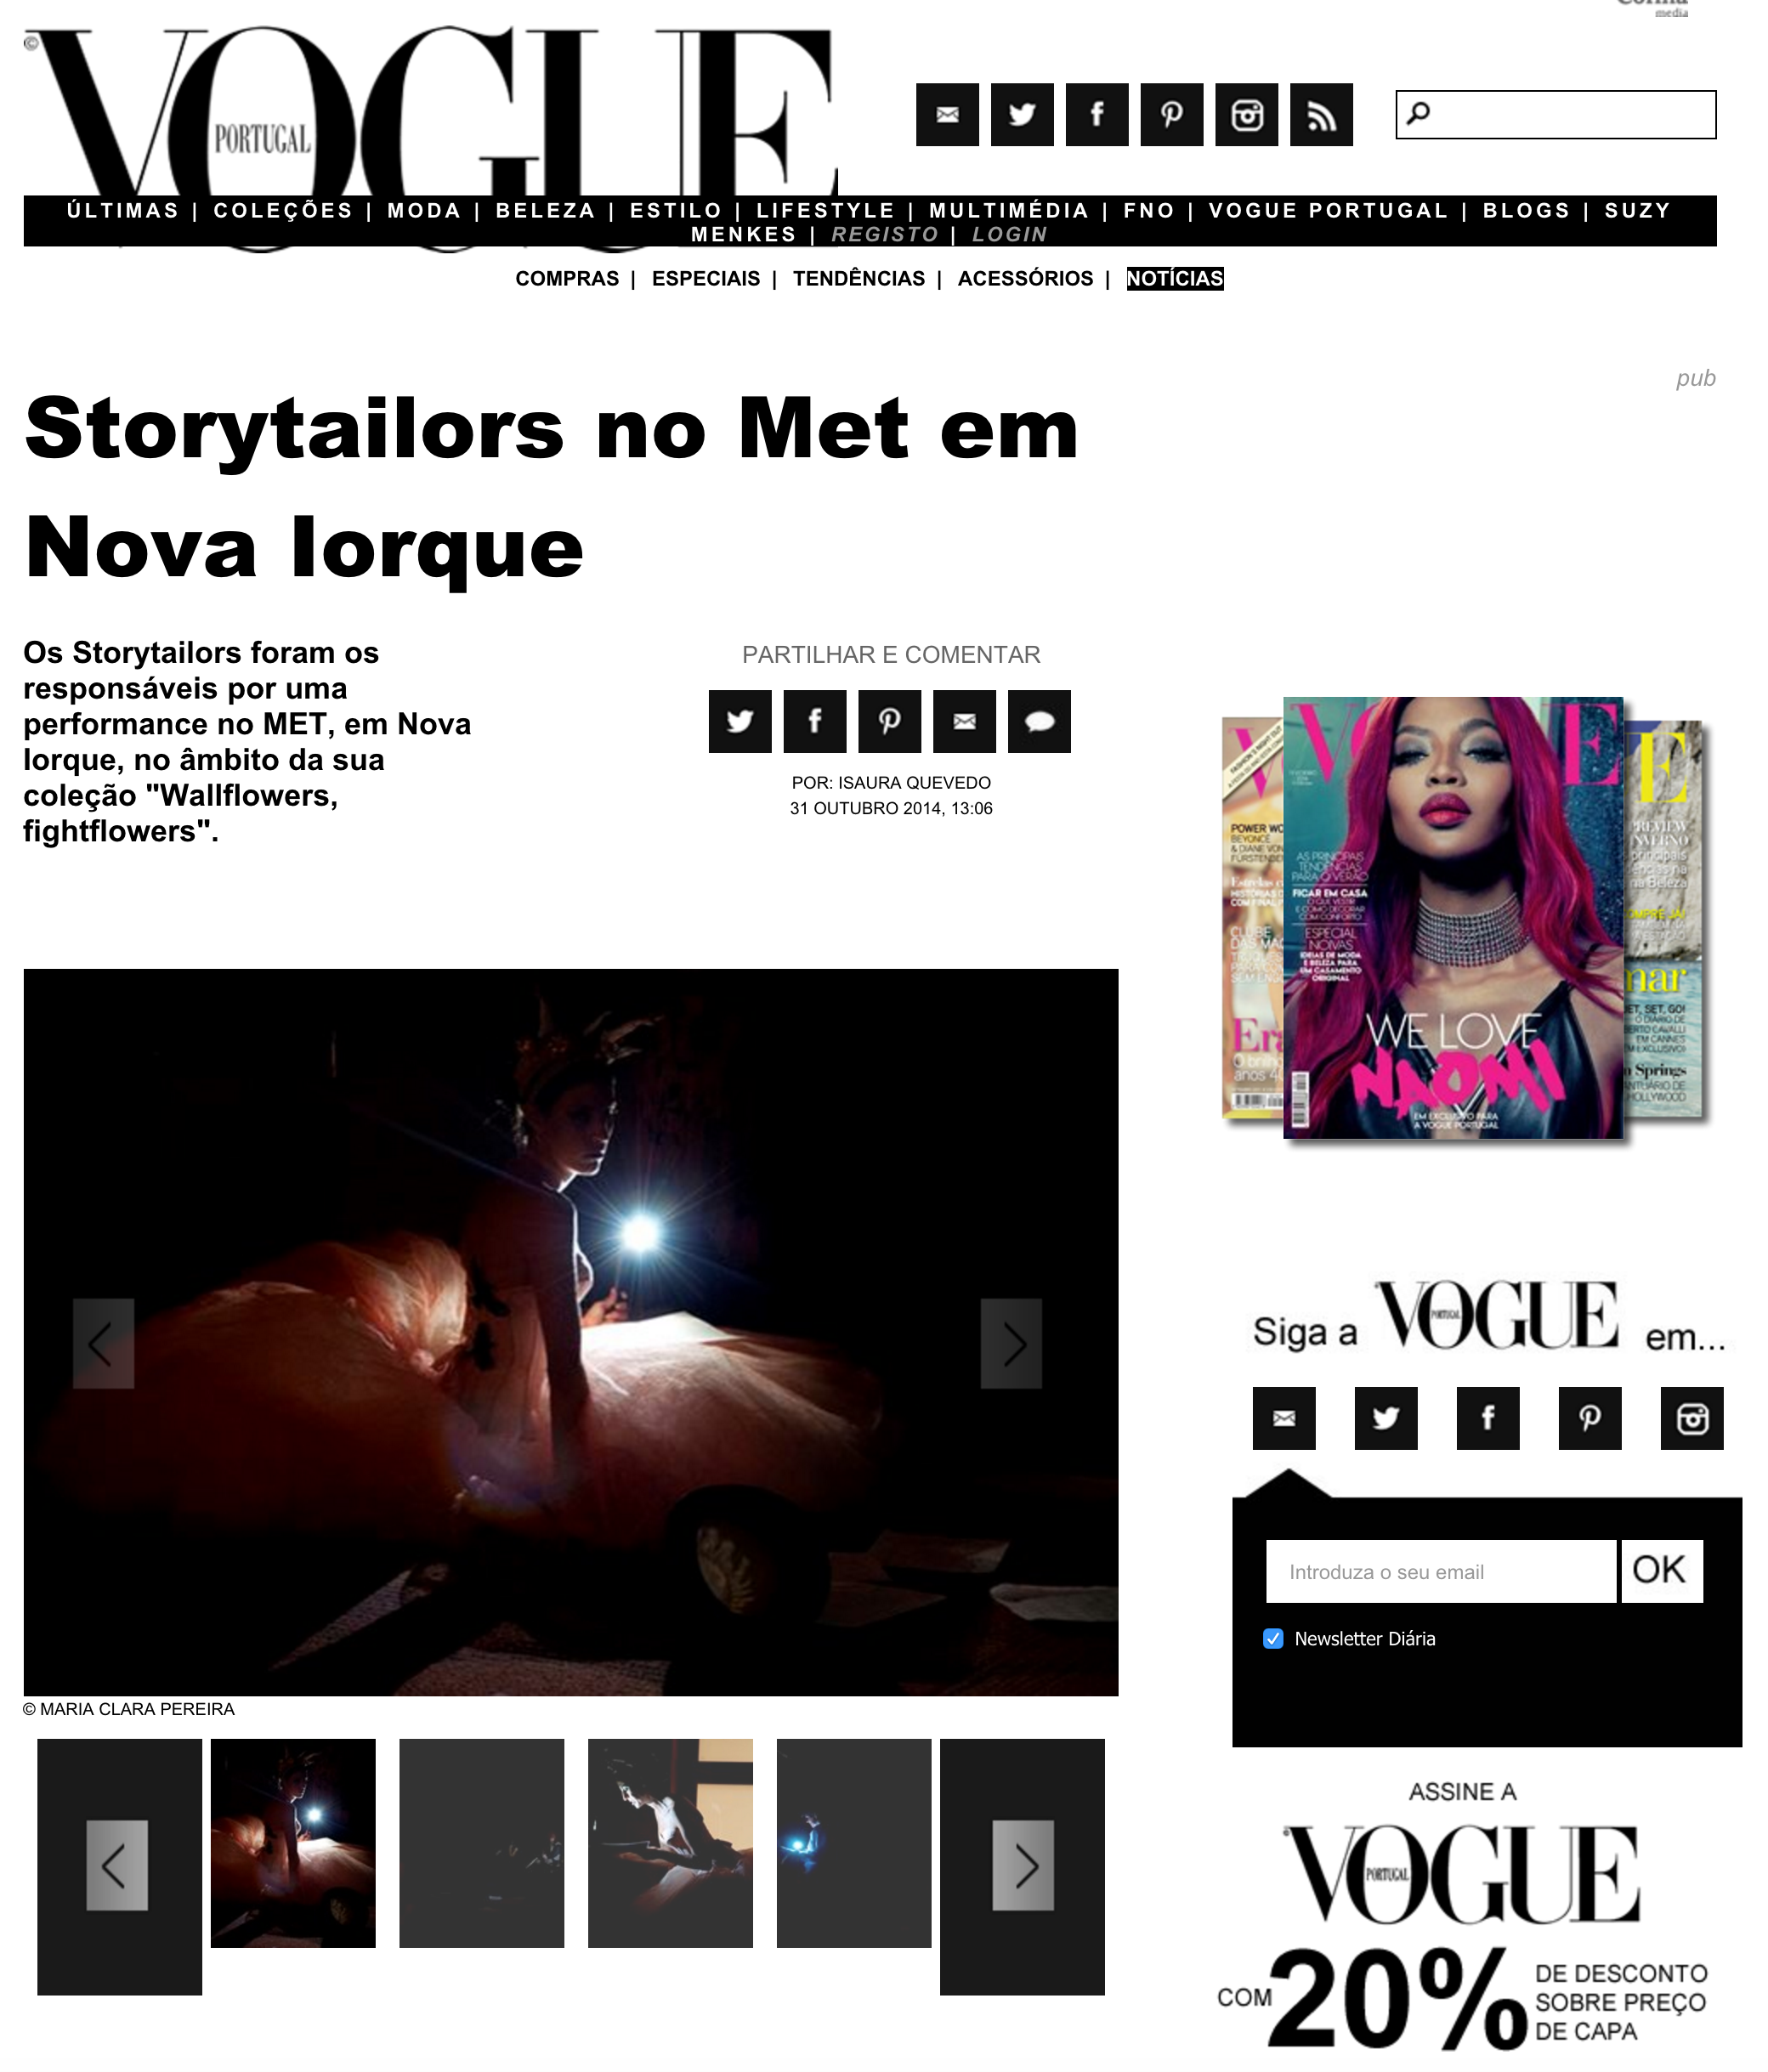 Storytailors at the MET in NY, Vogue Portugal 2014